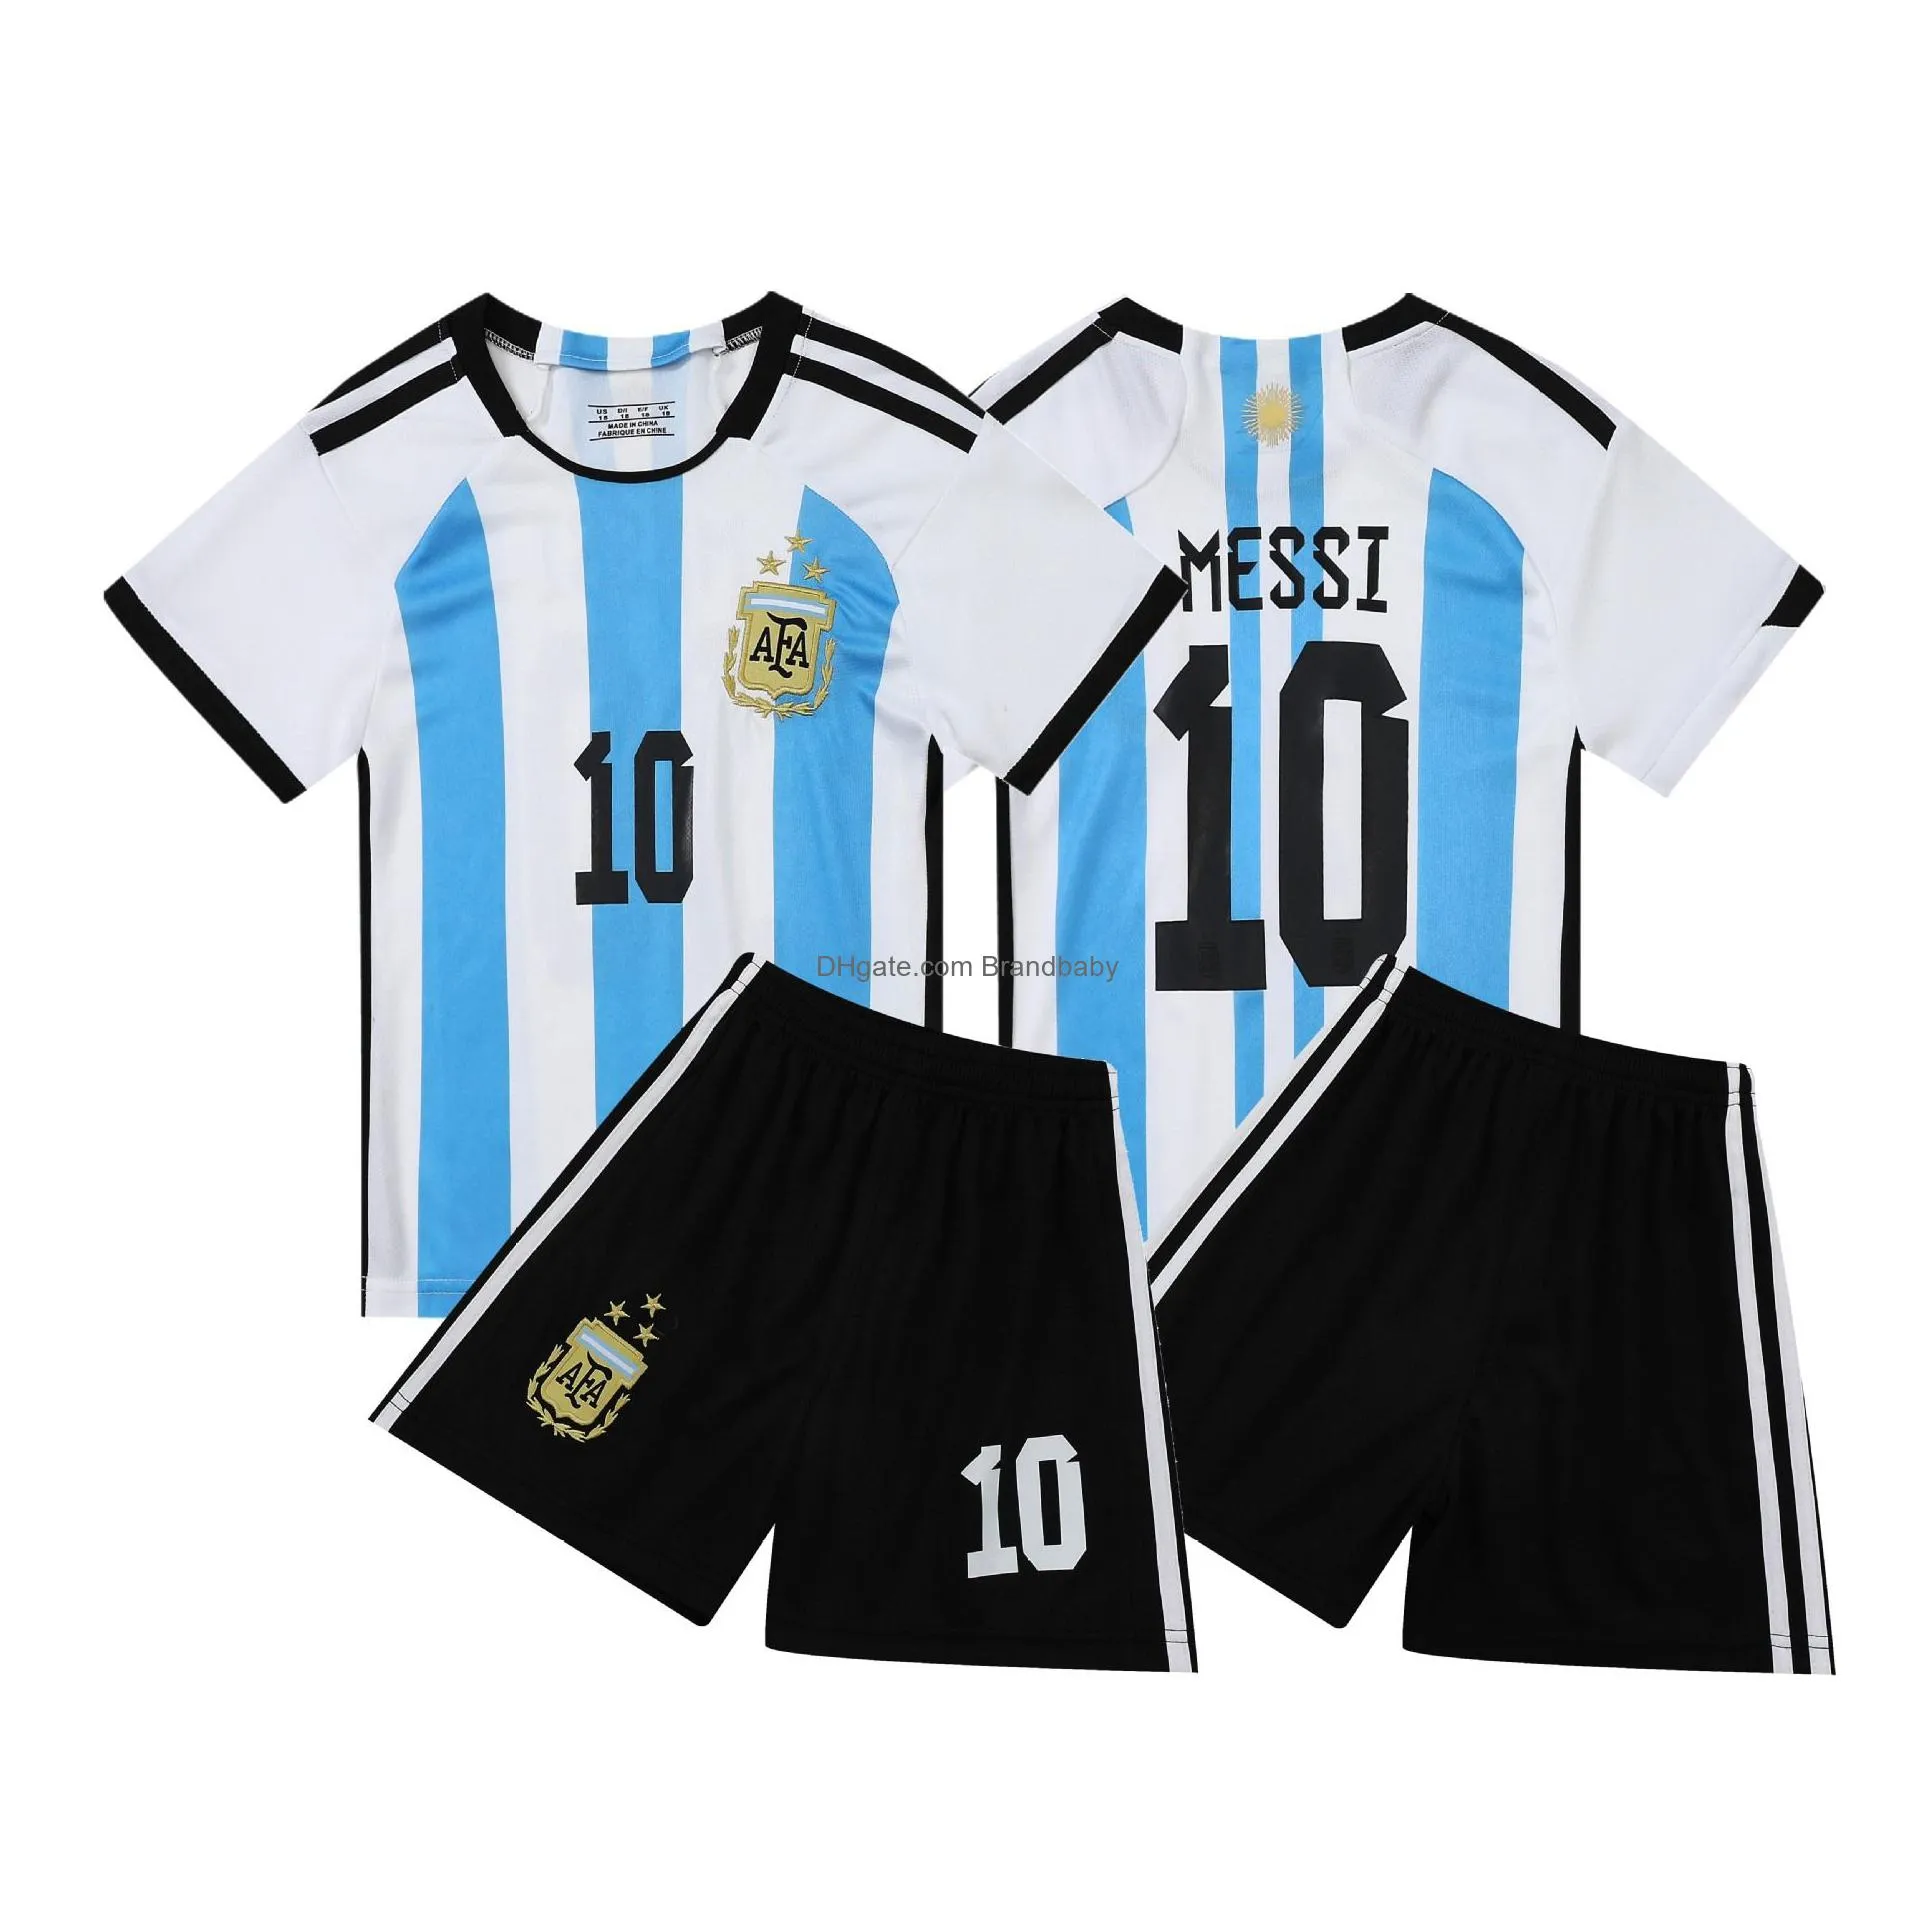 soccer uniforms suits children baby kids childrens jerseys printed number elementary school students soccer training class team uniforms